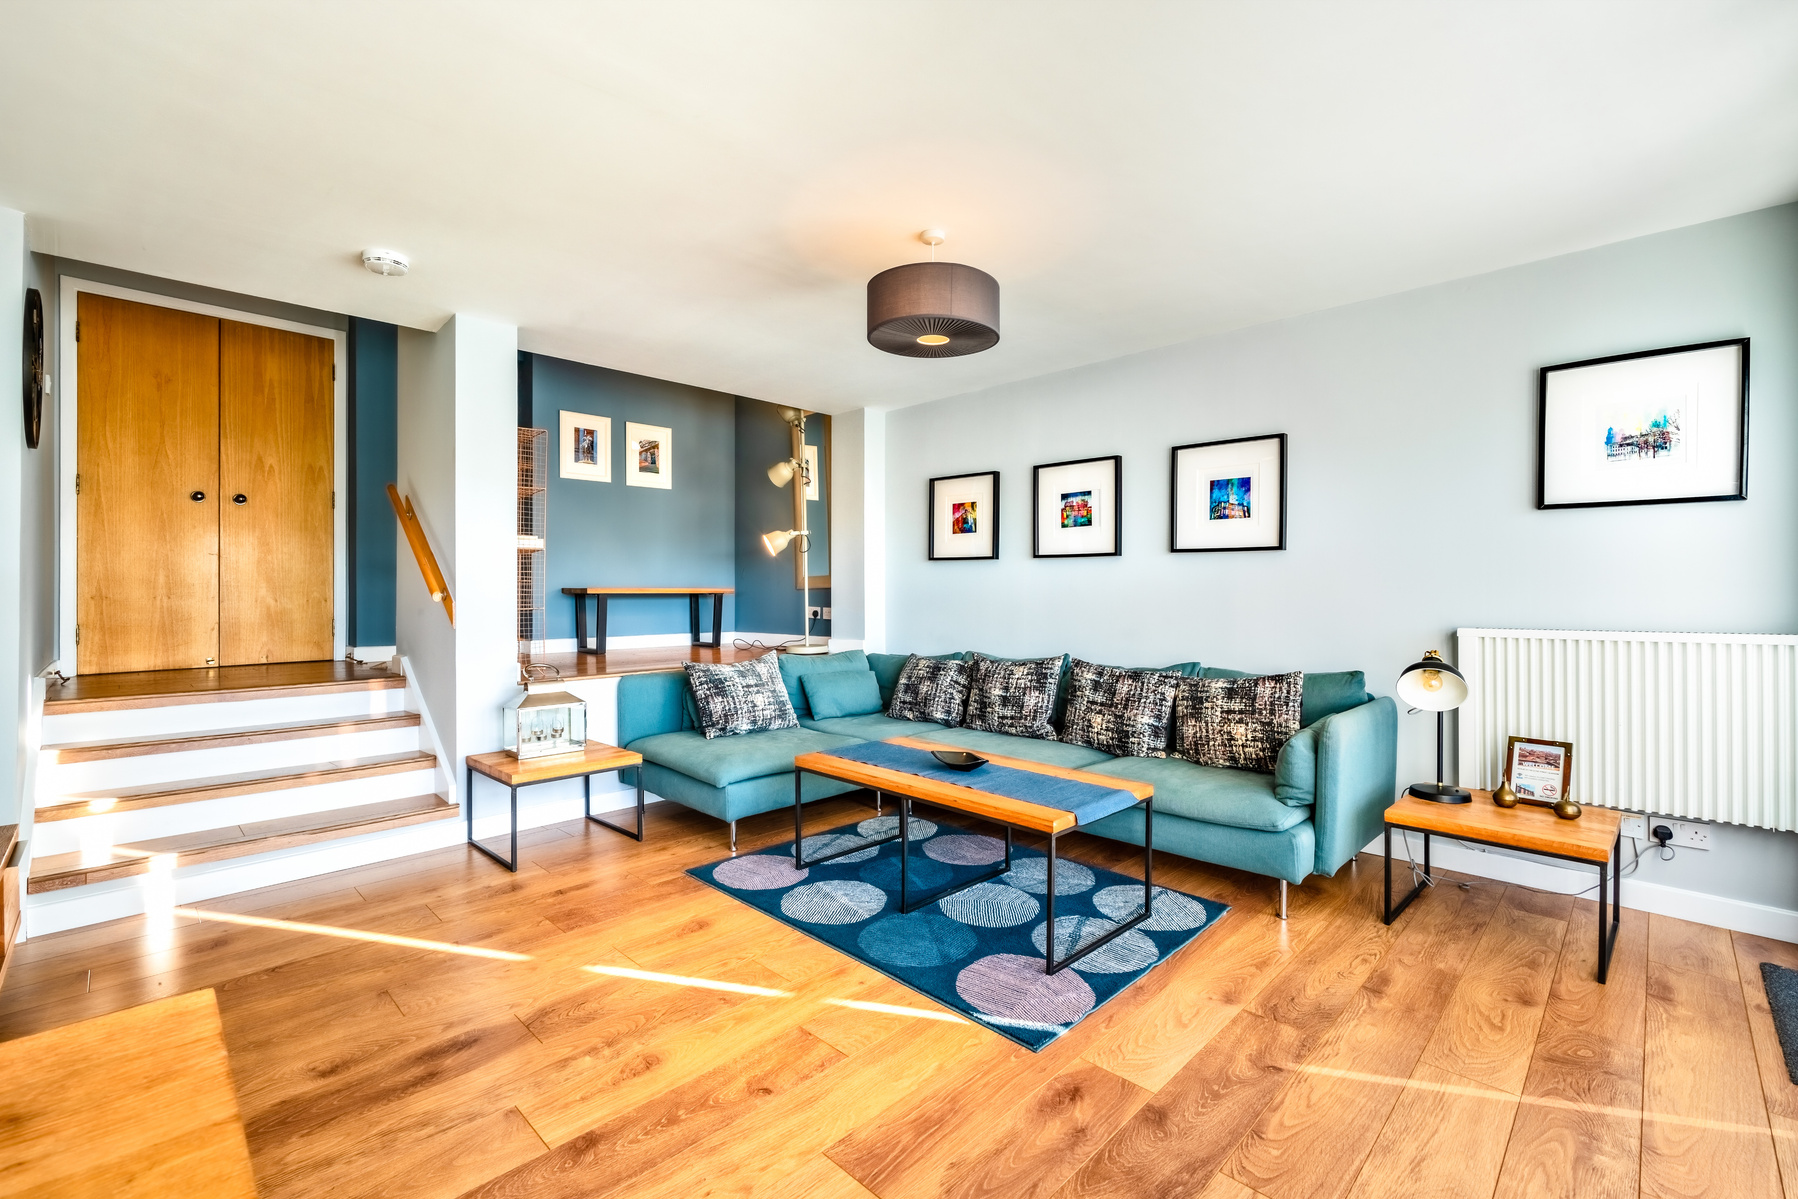 Completed flat image for Scotland Interior HDR Property - Photography by Nate Cleary